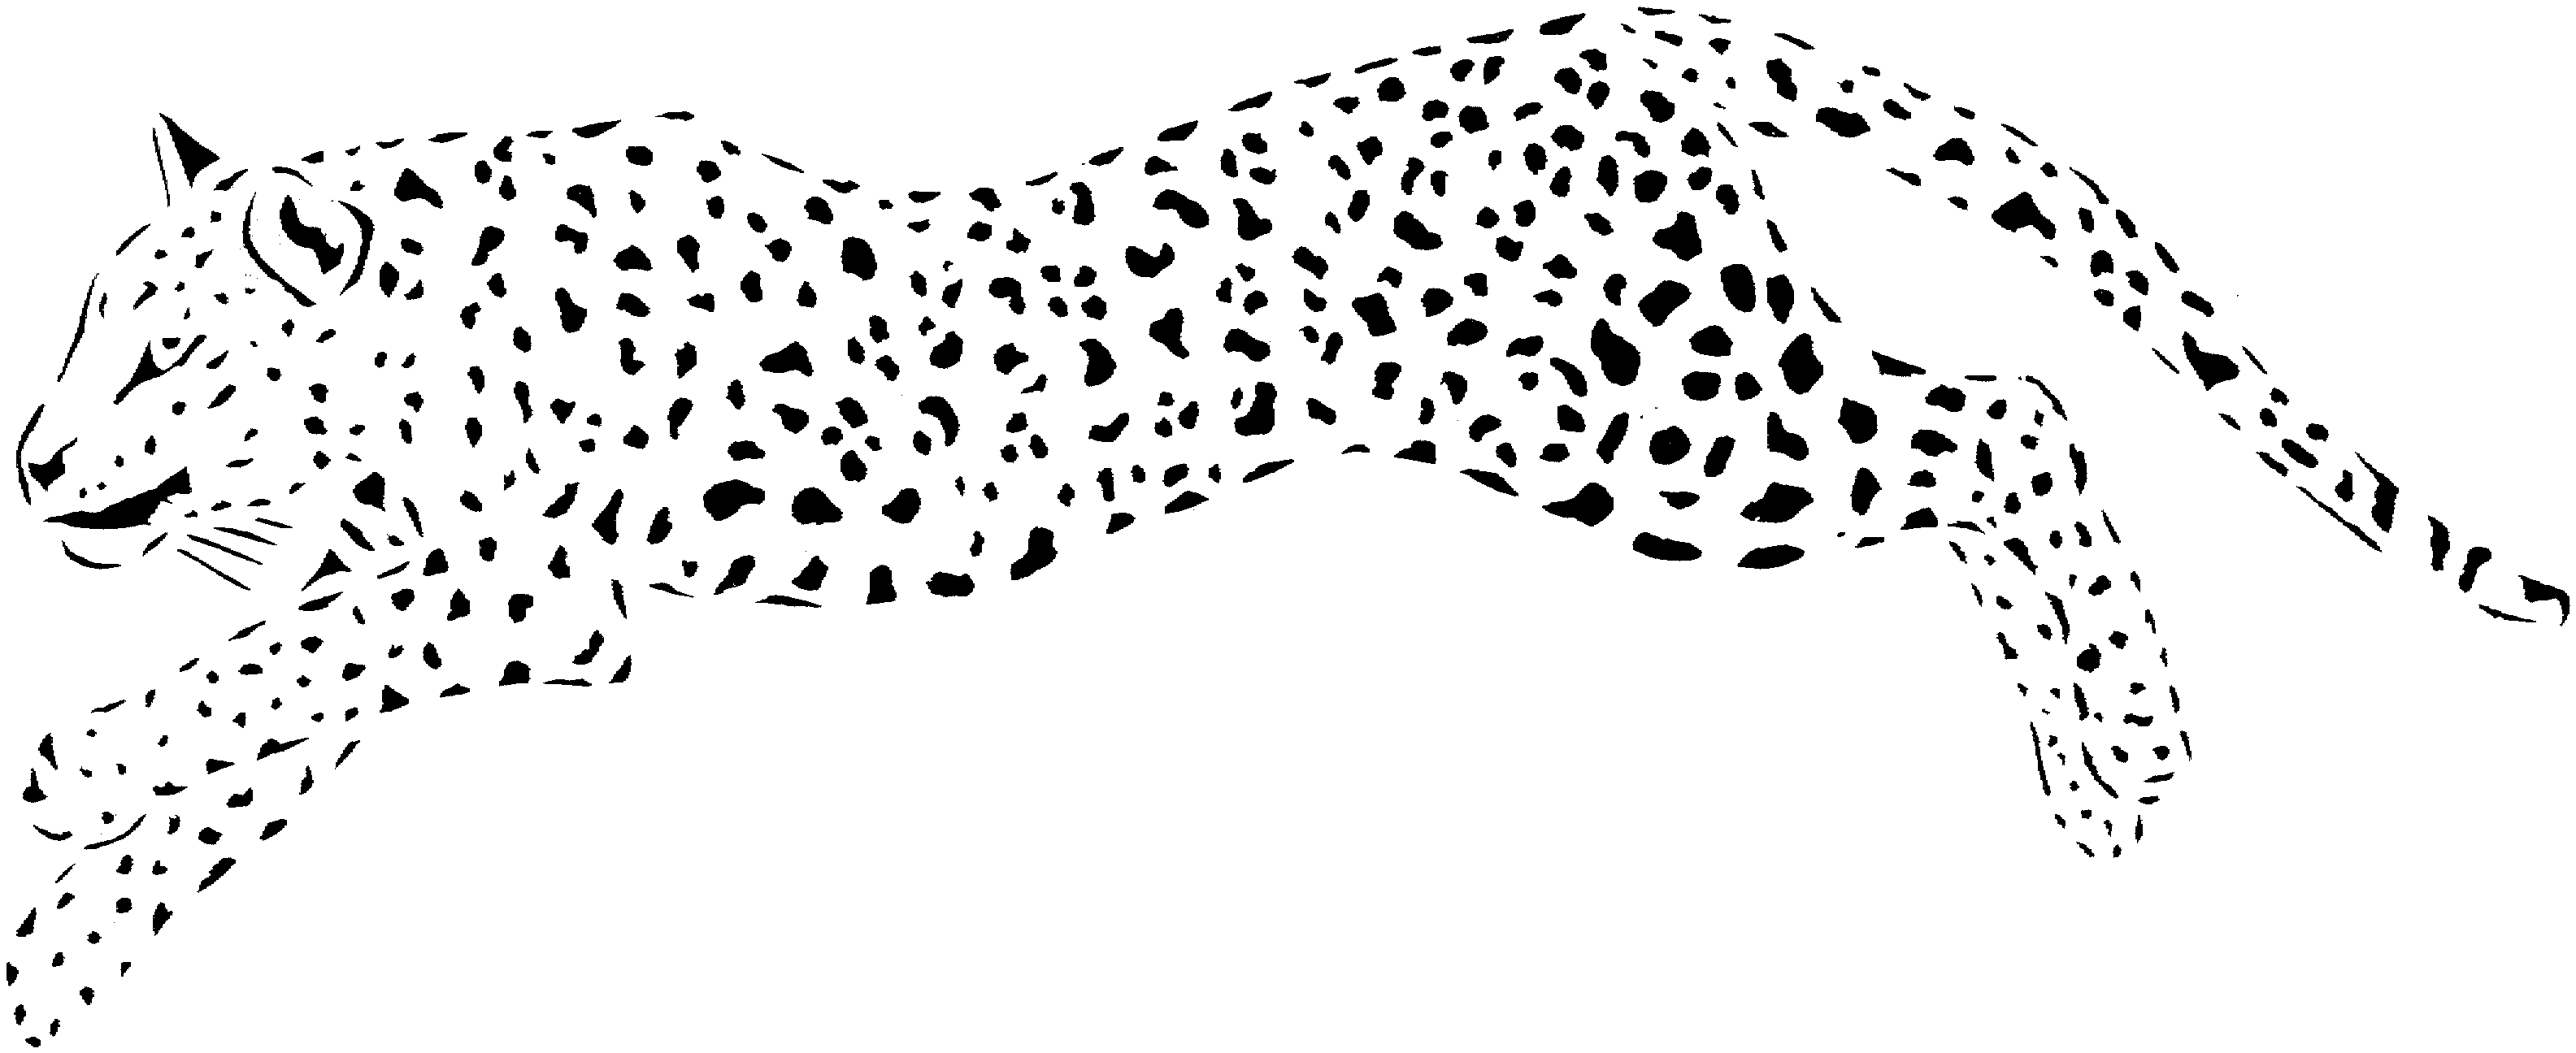 Cheetah Coloring Pages (20 Pictures) - Colorine.net | 9801